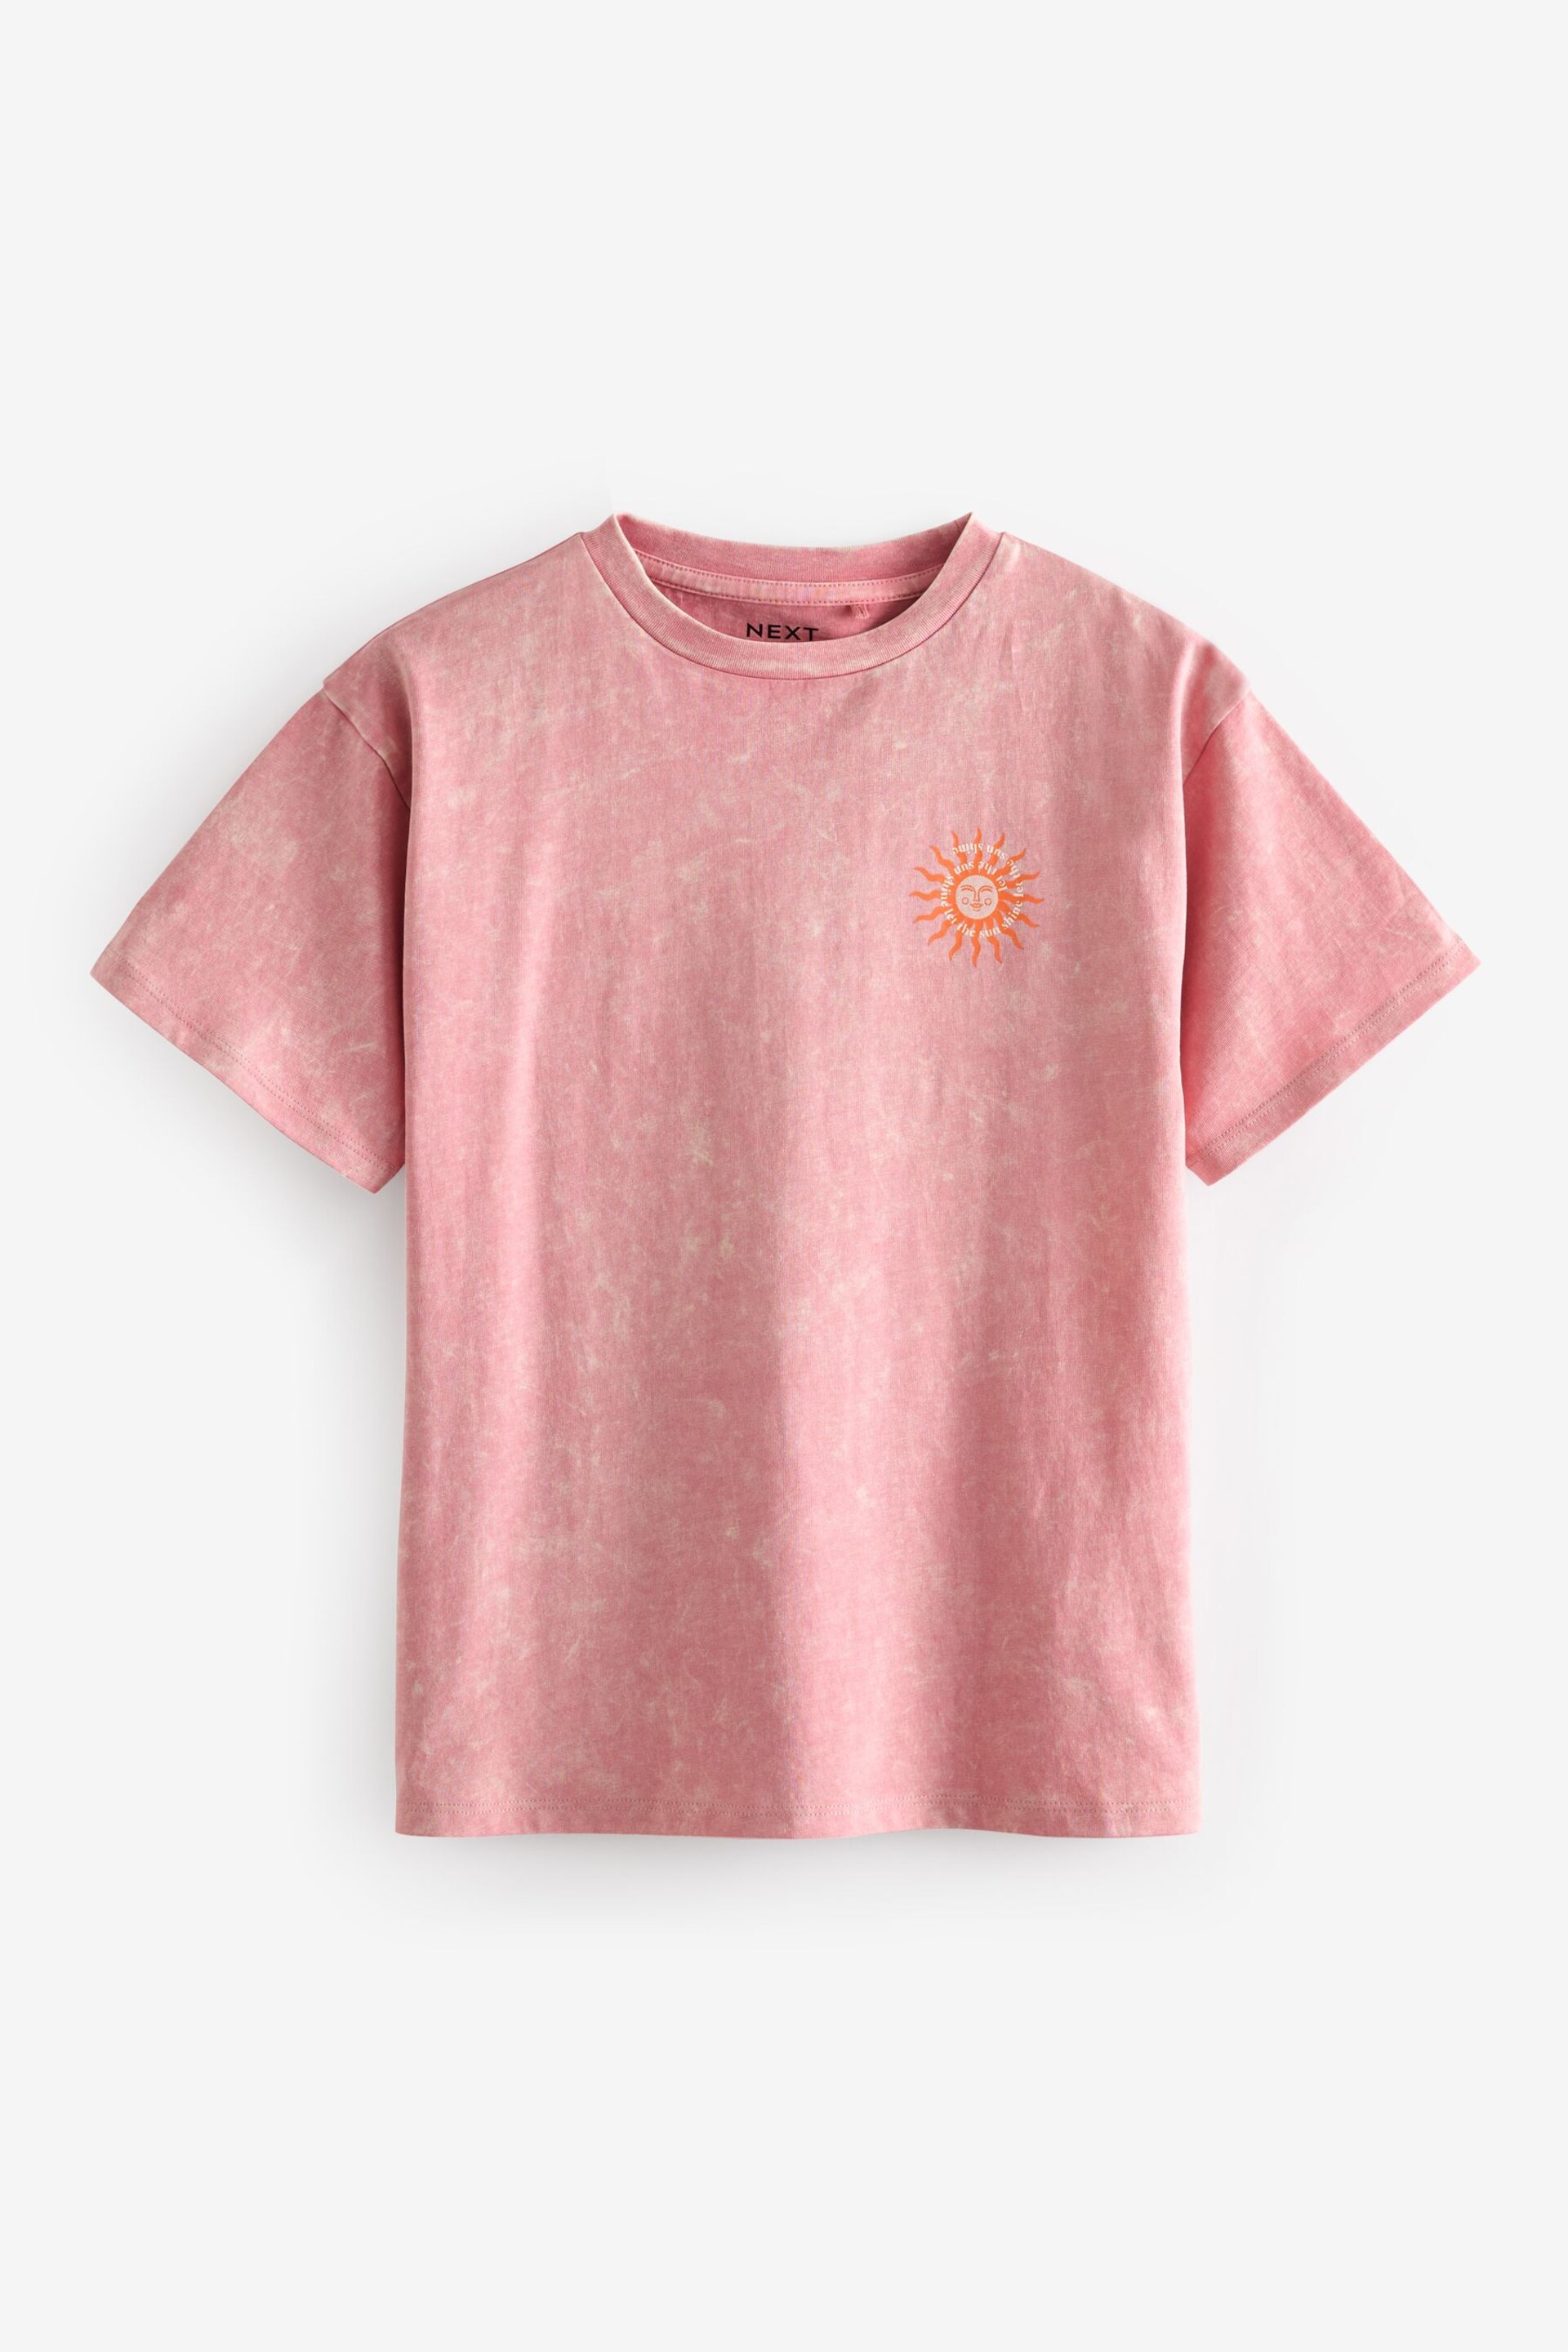 Pink Oversized Graphic T-Shirt (3-16yrs) - Image 5 of 7